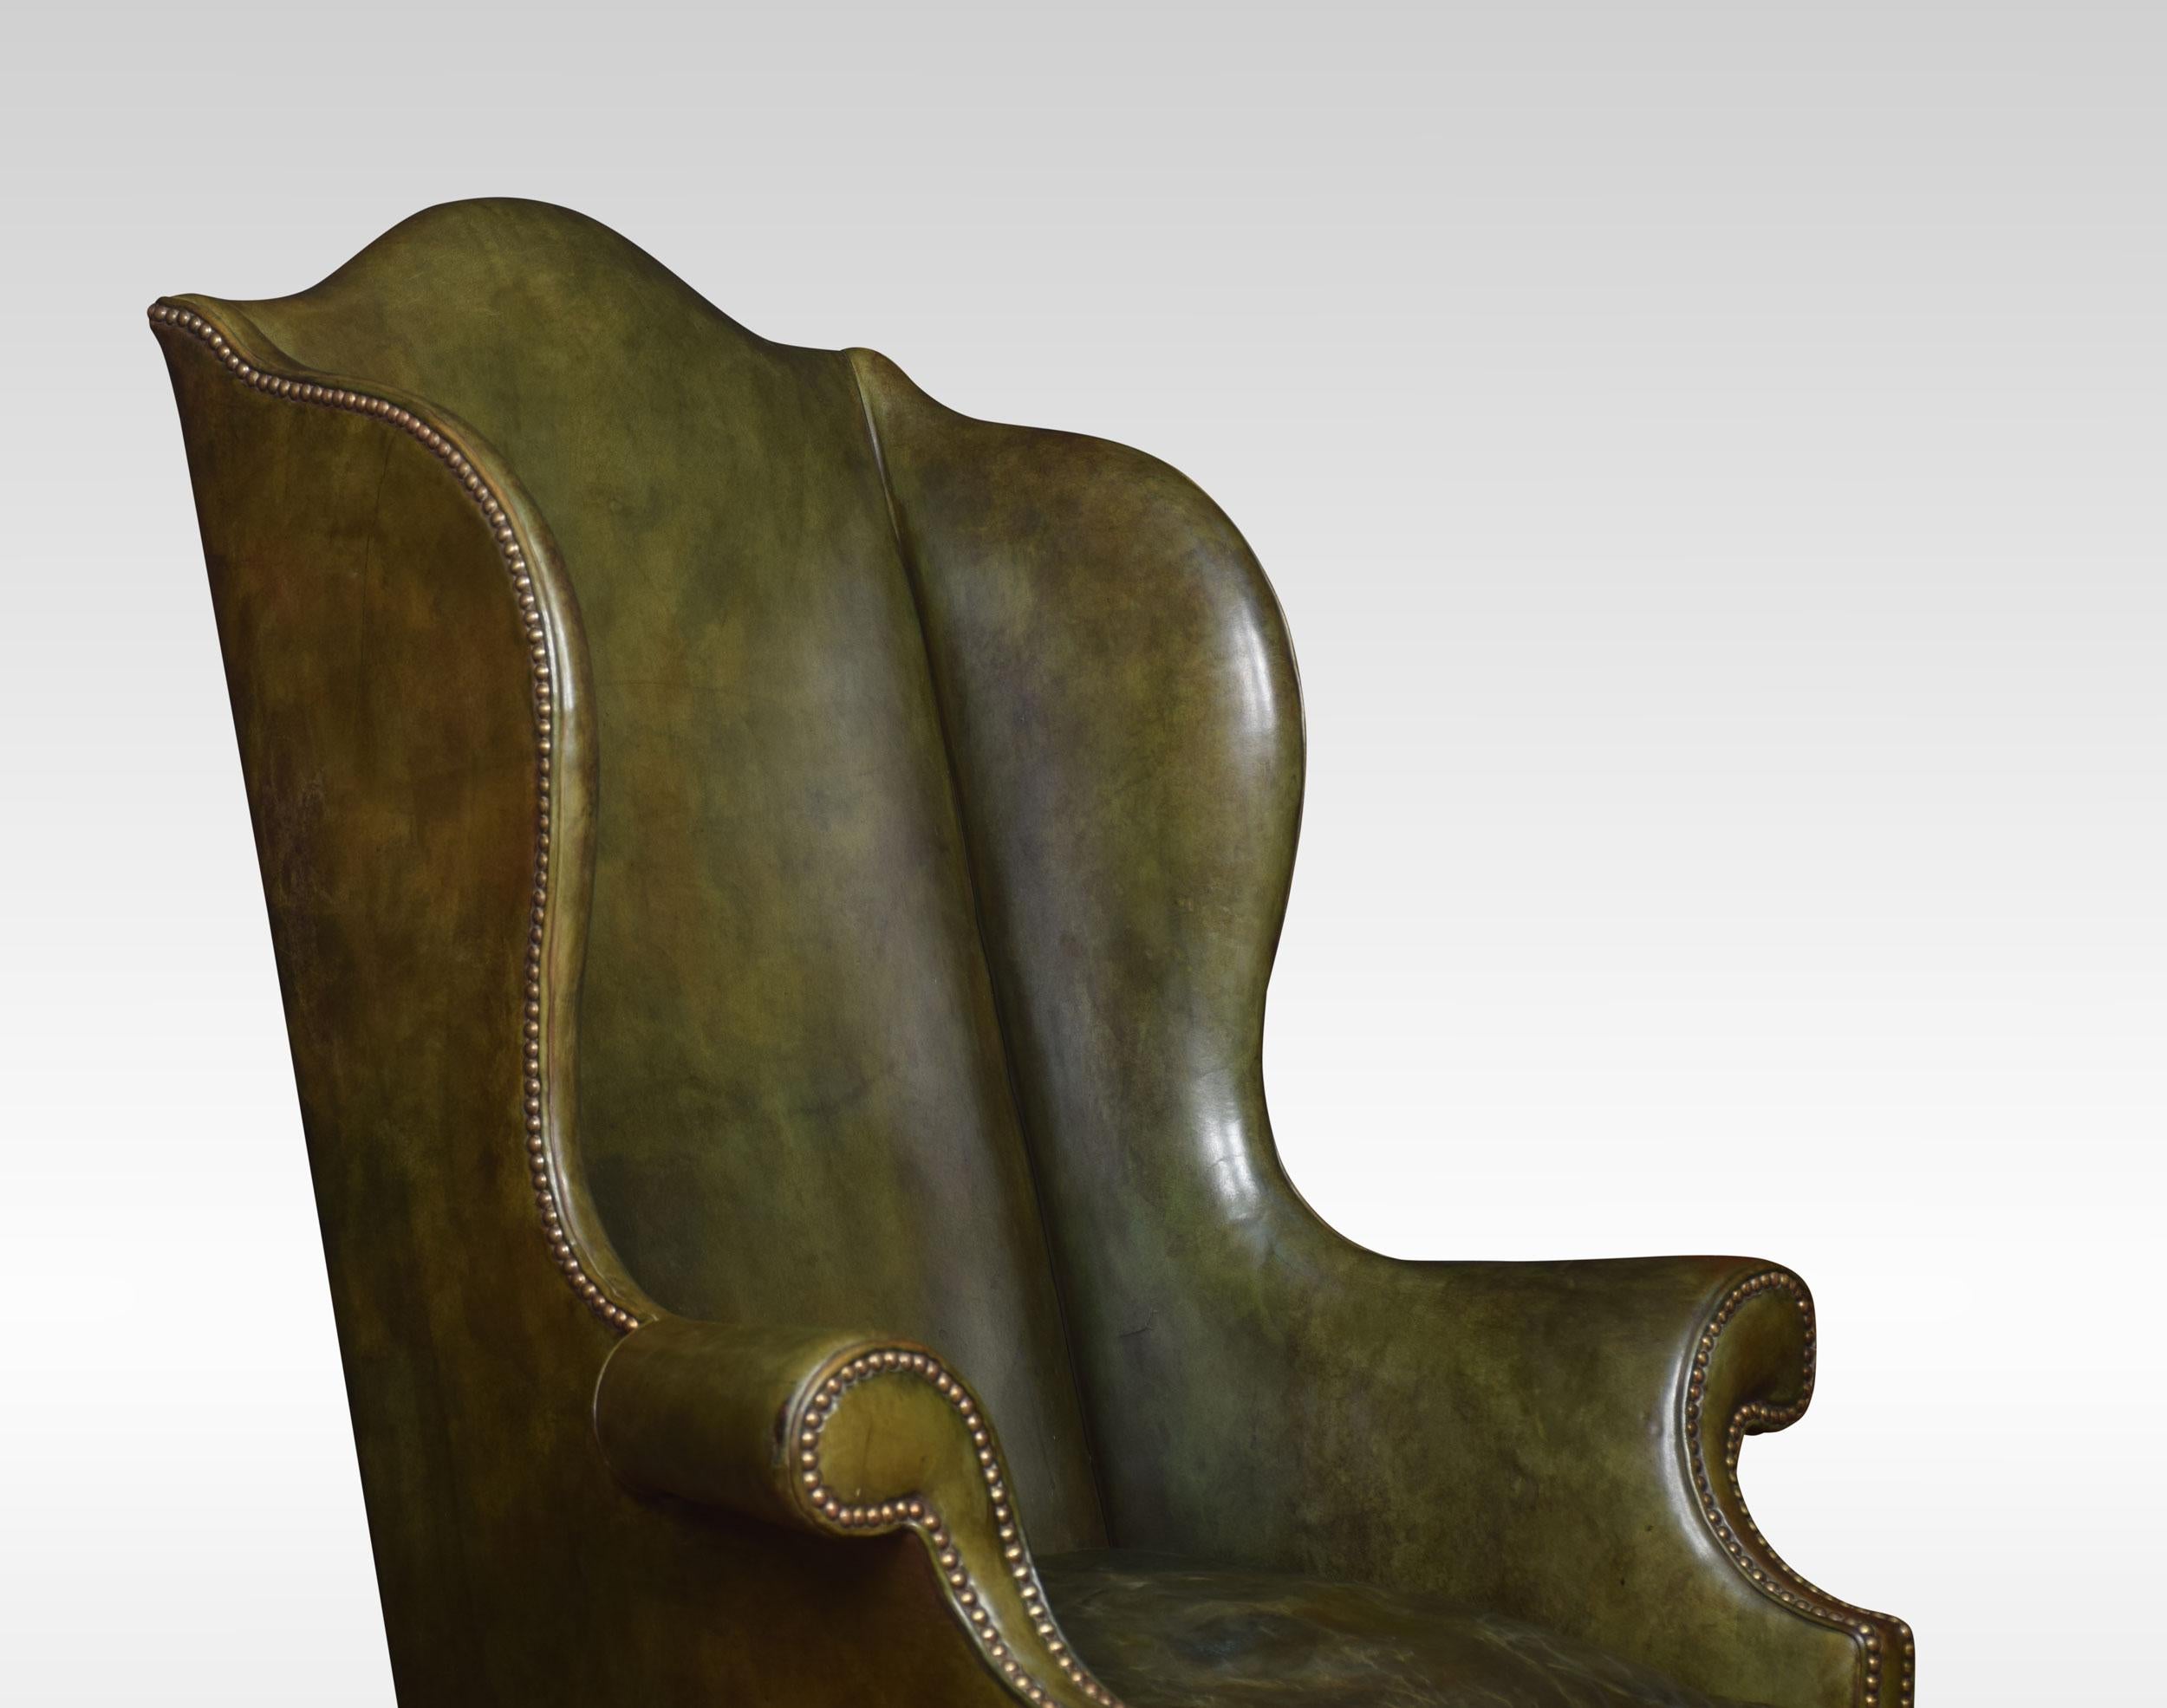 Walnut framed armchair the high arched back above winging out swept scroll arms and removable green leather seat. Raised up on carved legs joined by an arched and carved front stretcher and finely detailed “Braganza” feet.

Dimensions
Height 50